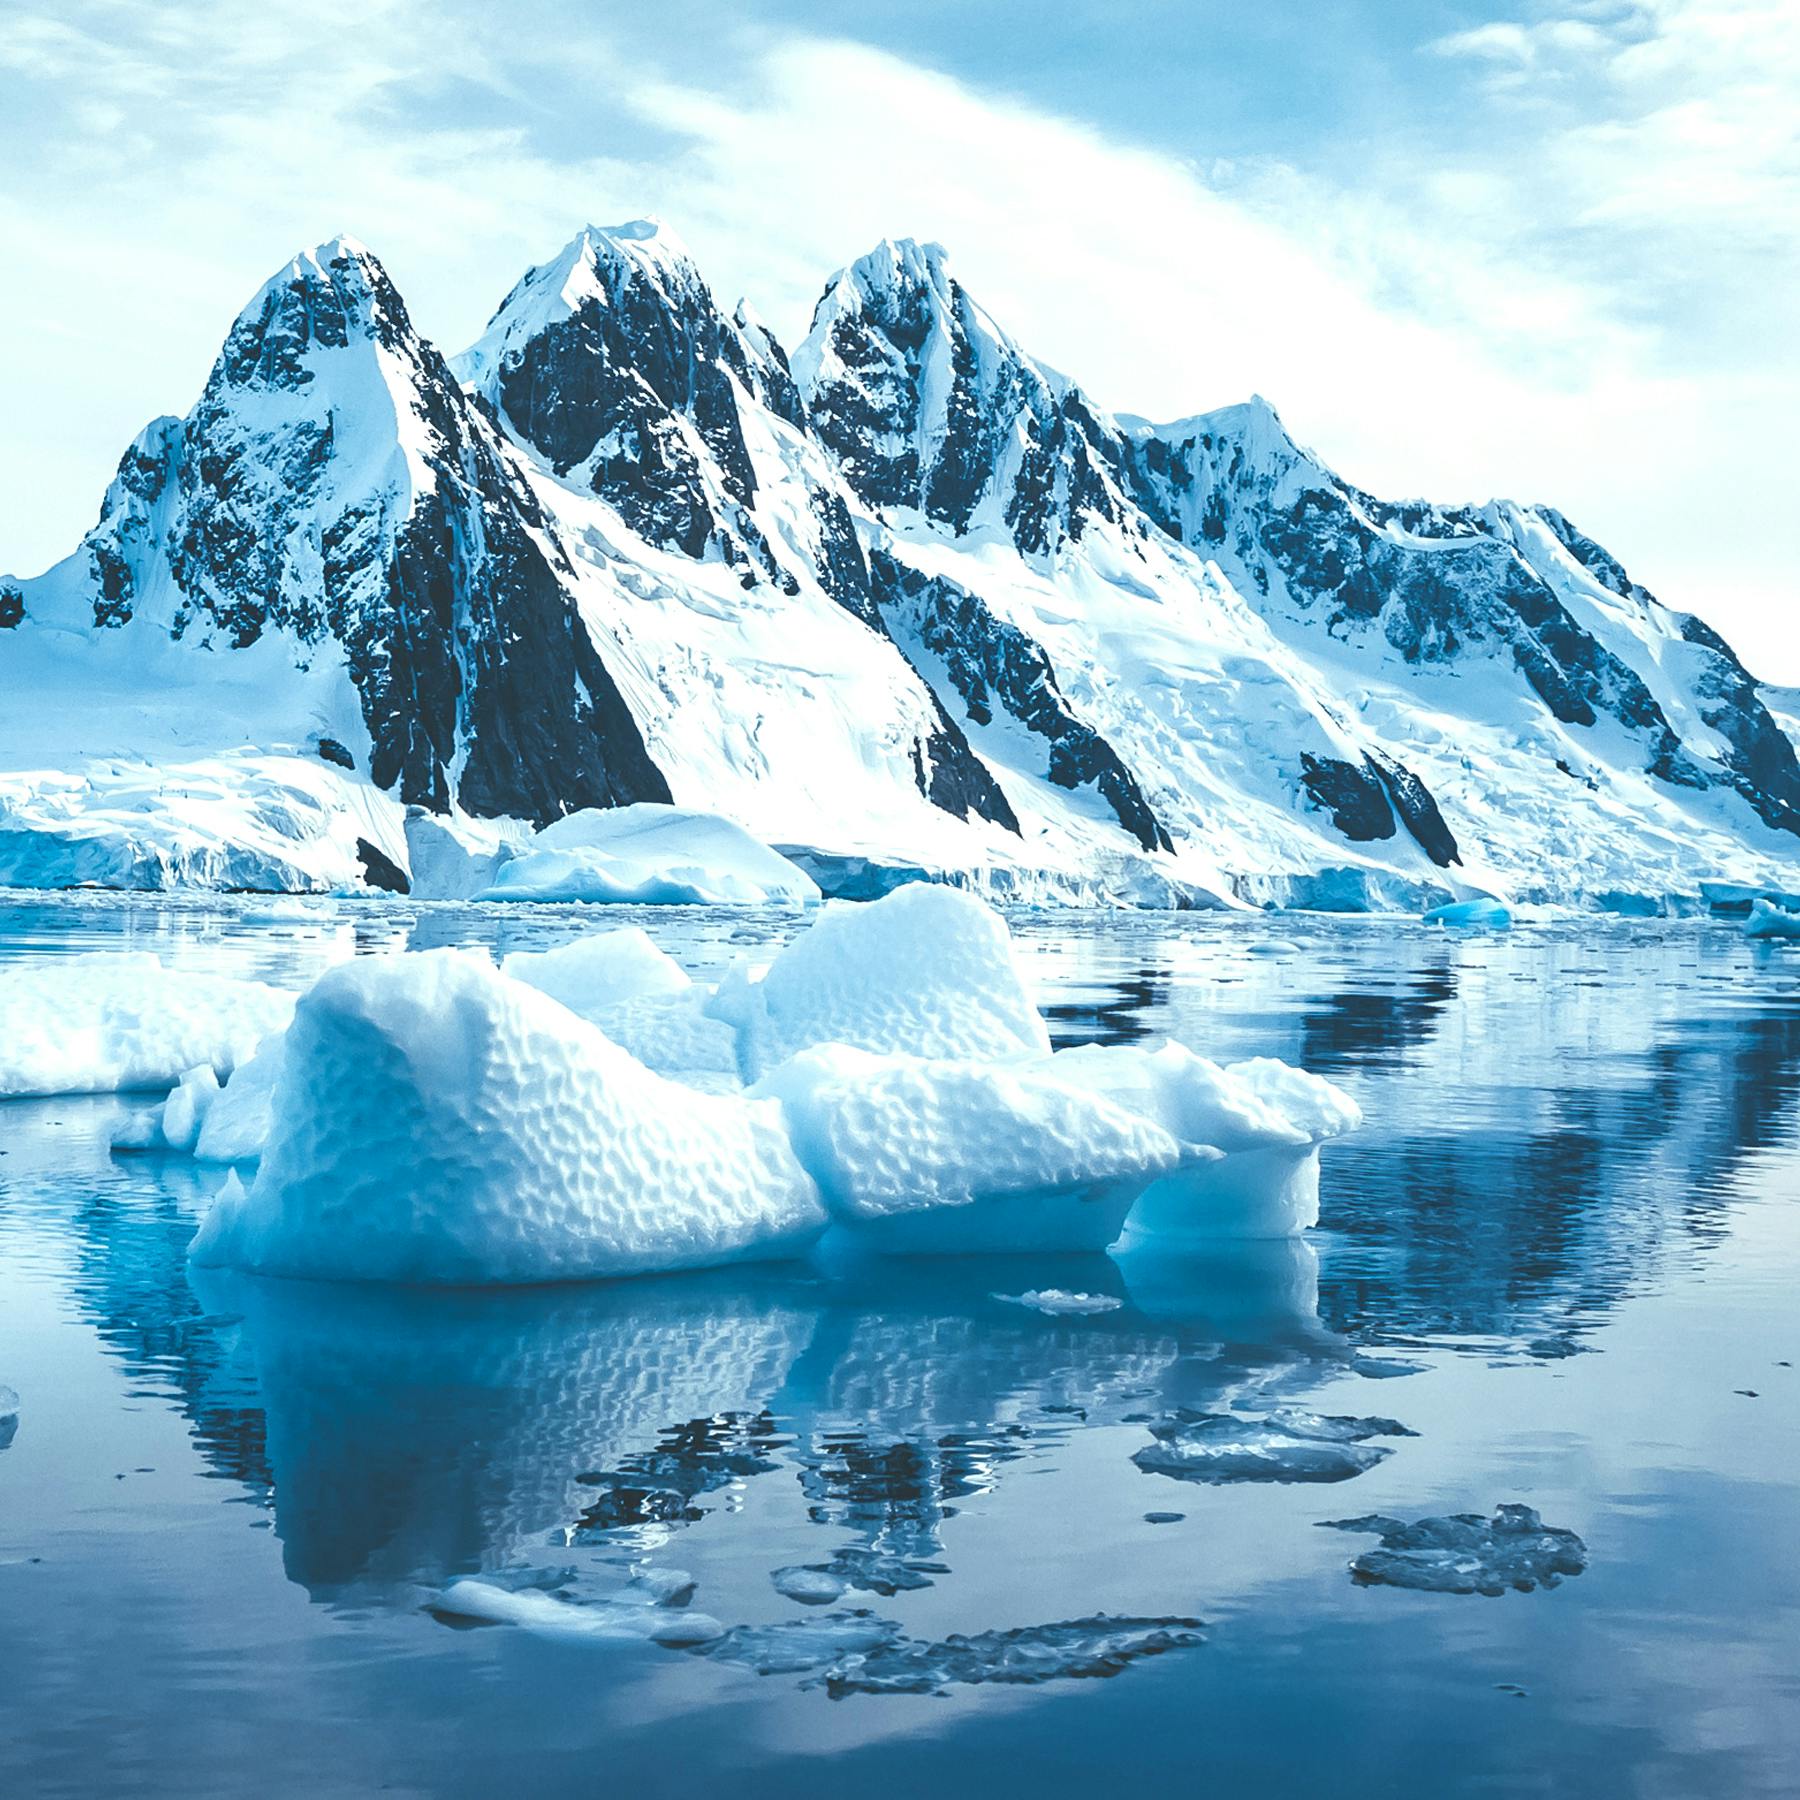 Computer render of a snow covered mountain with ocean waters in front of it along with small icebergs.